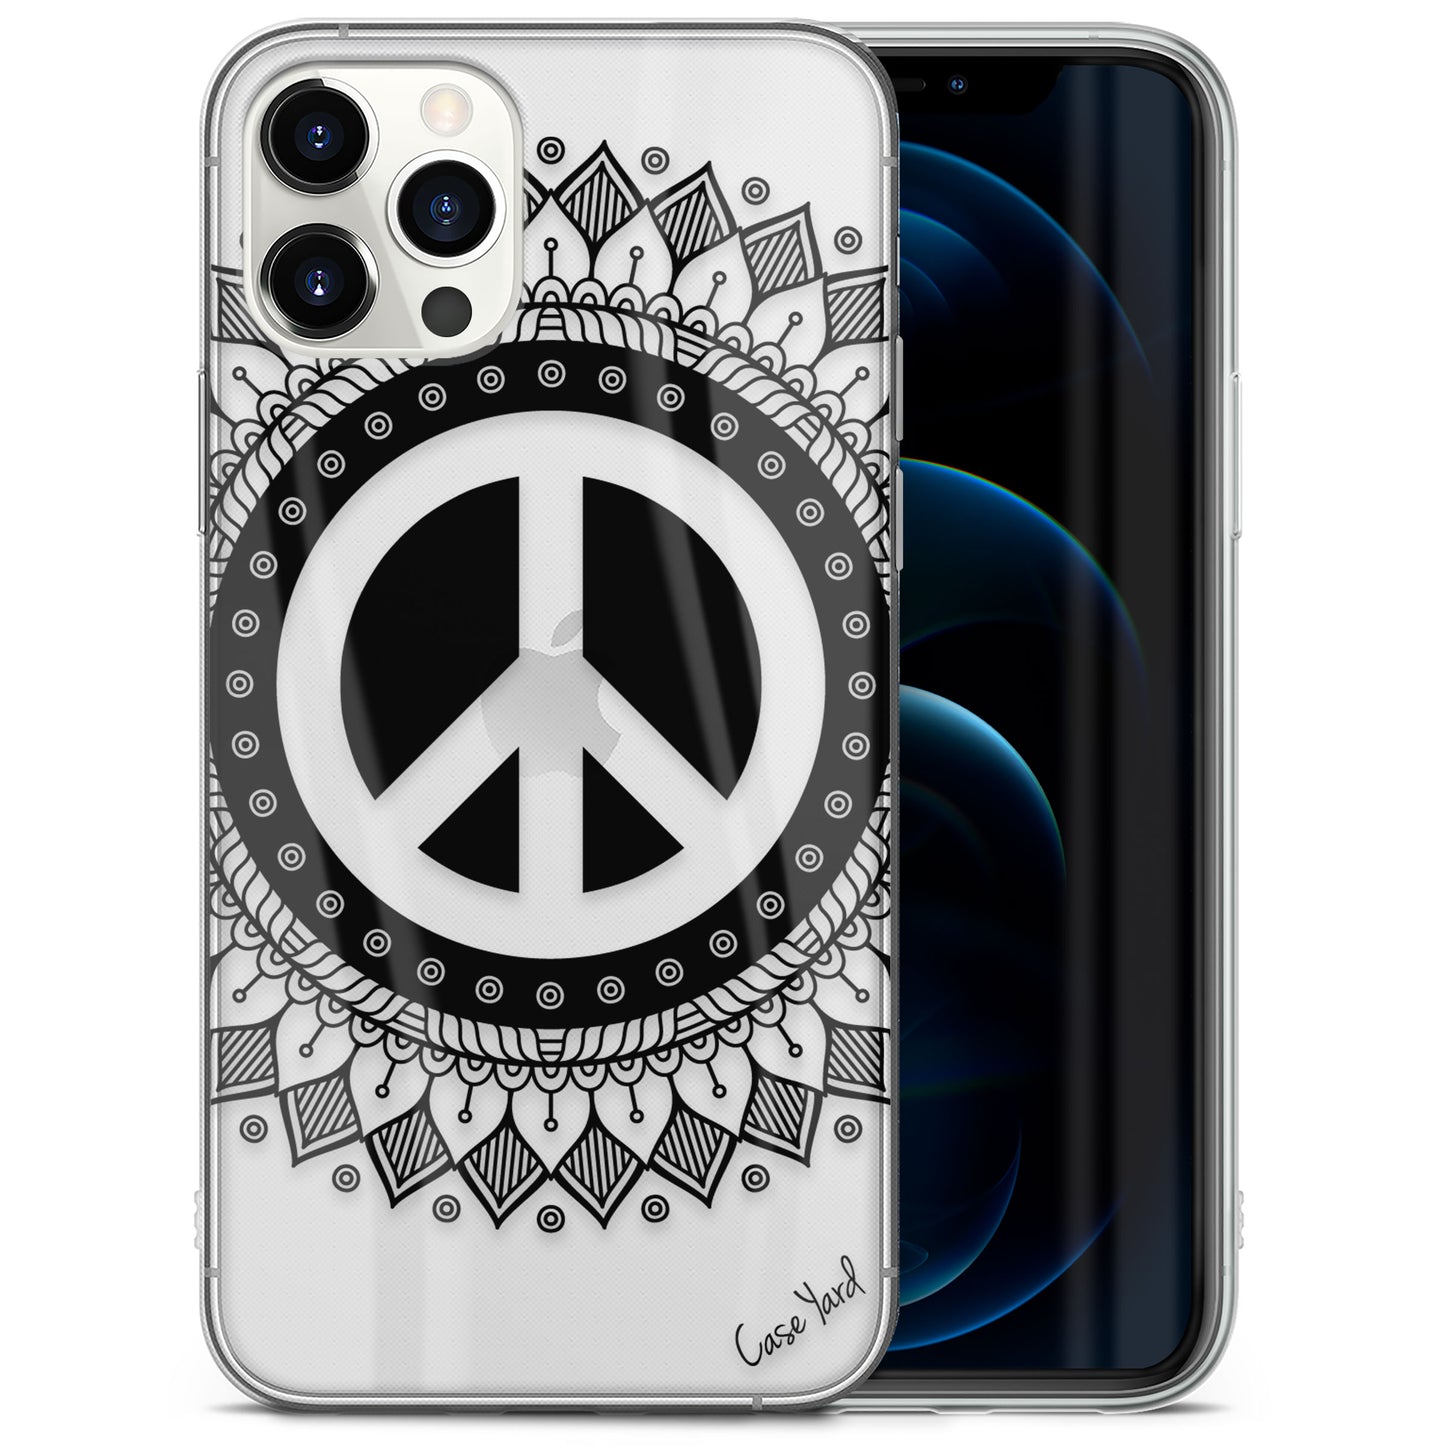 TPU Clear case with (Peace Mandala) Design for iPhone & Samsung Phones